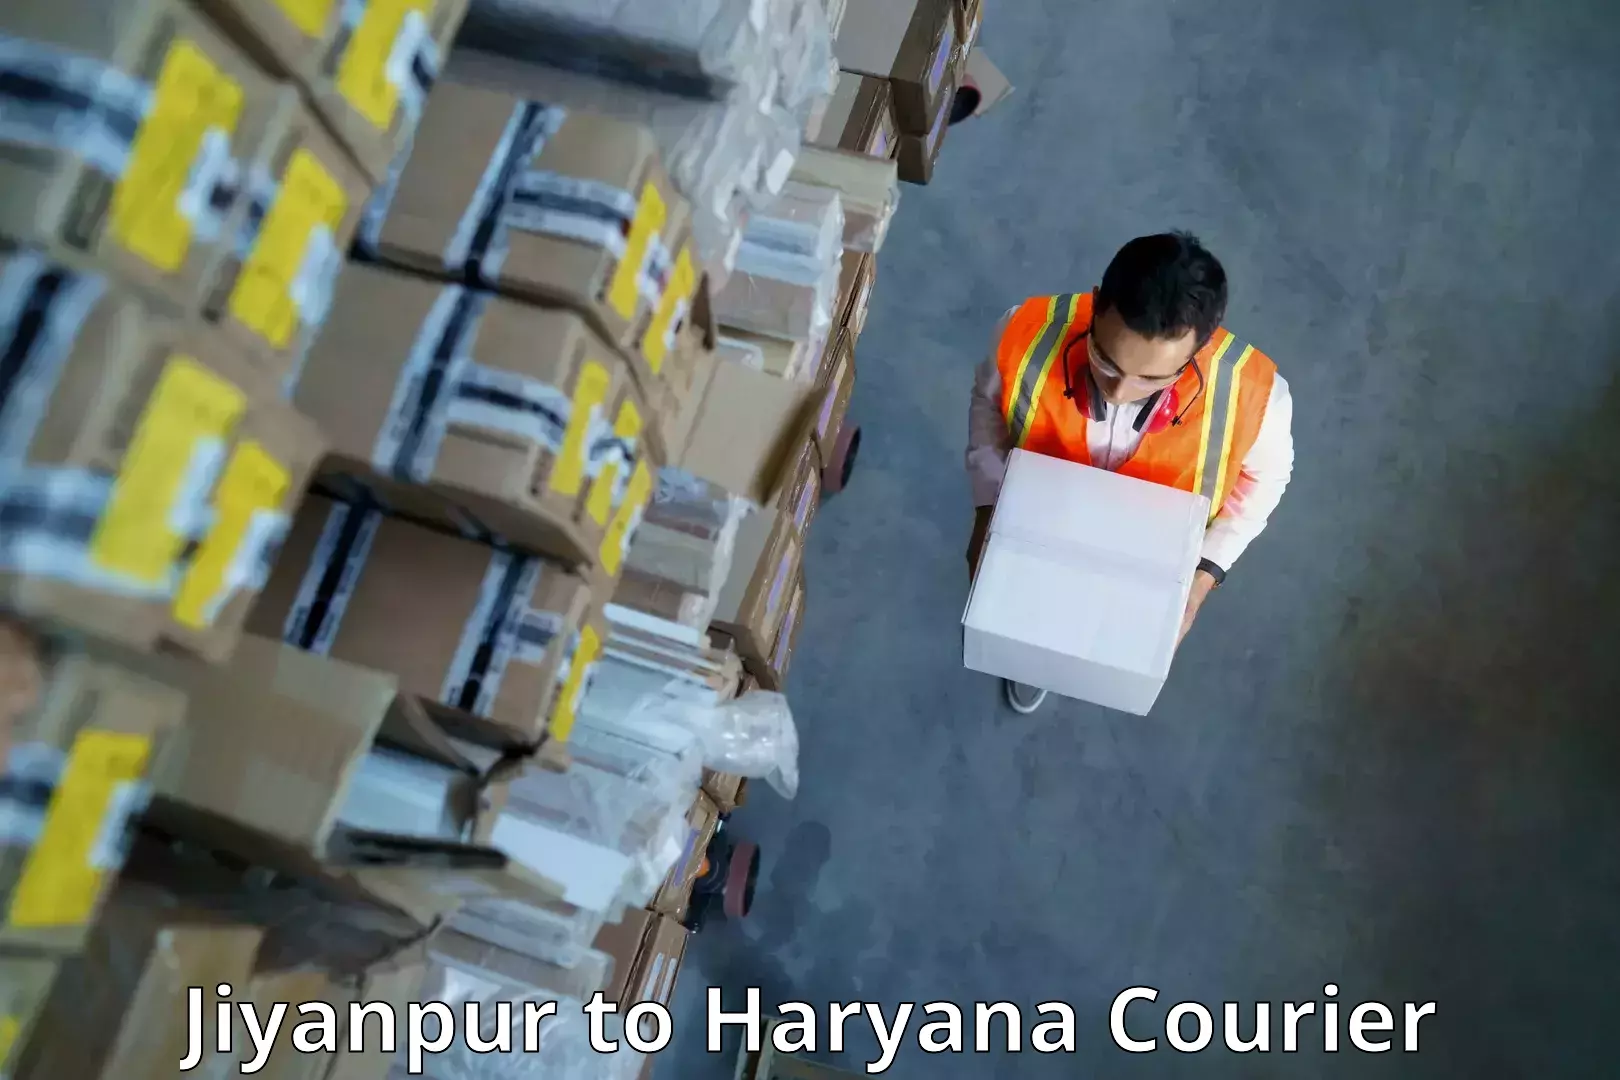 Versatile courier offerings Jiyanpur to Chaudhary Charan Singh Haryana Agricultural University Hisar